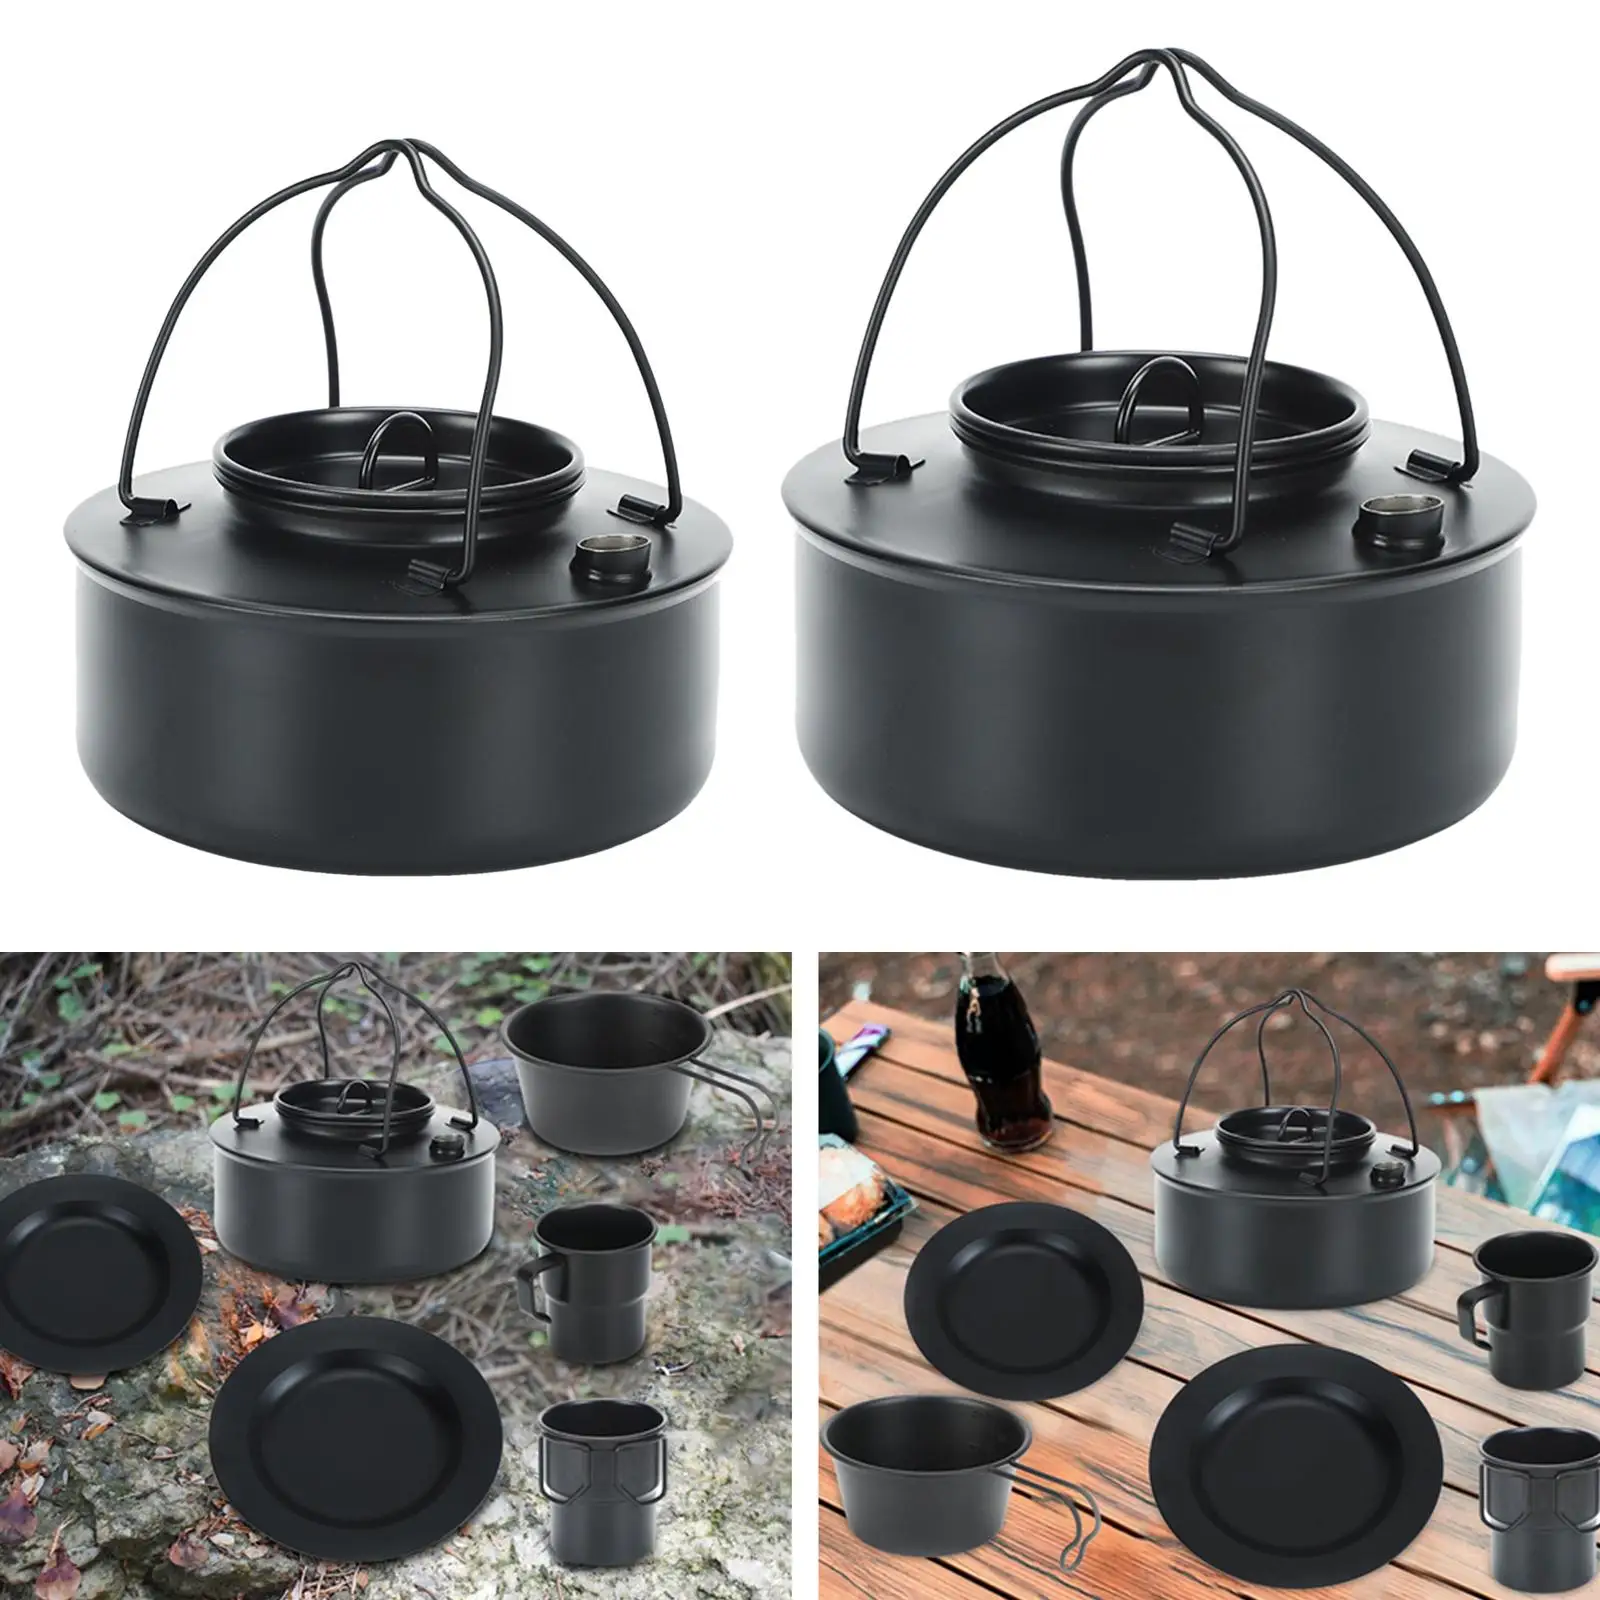 Portable Outdoor Tea Coffee Pot Teapot Campfire Kitchenware Cookware with Handle